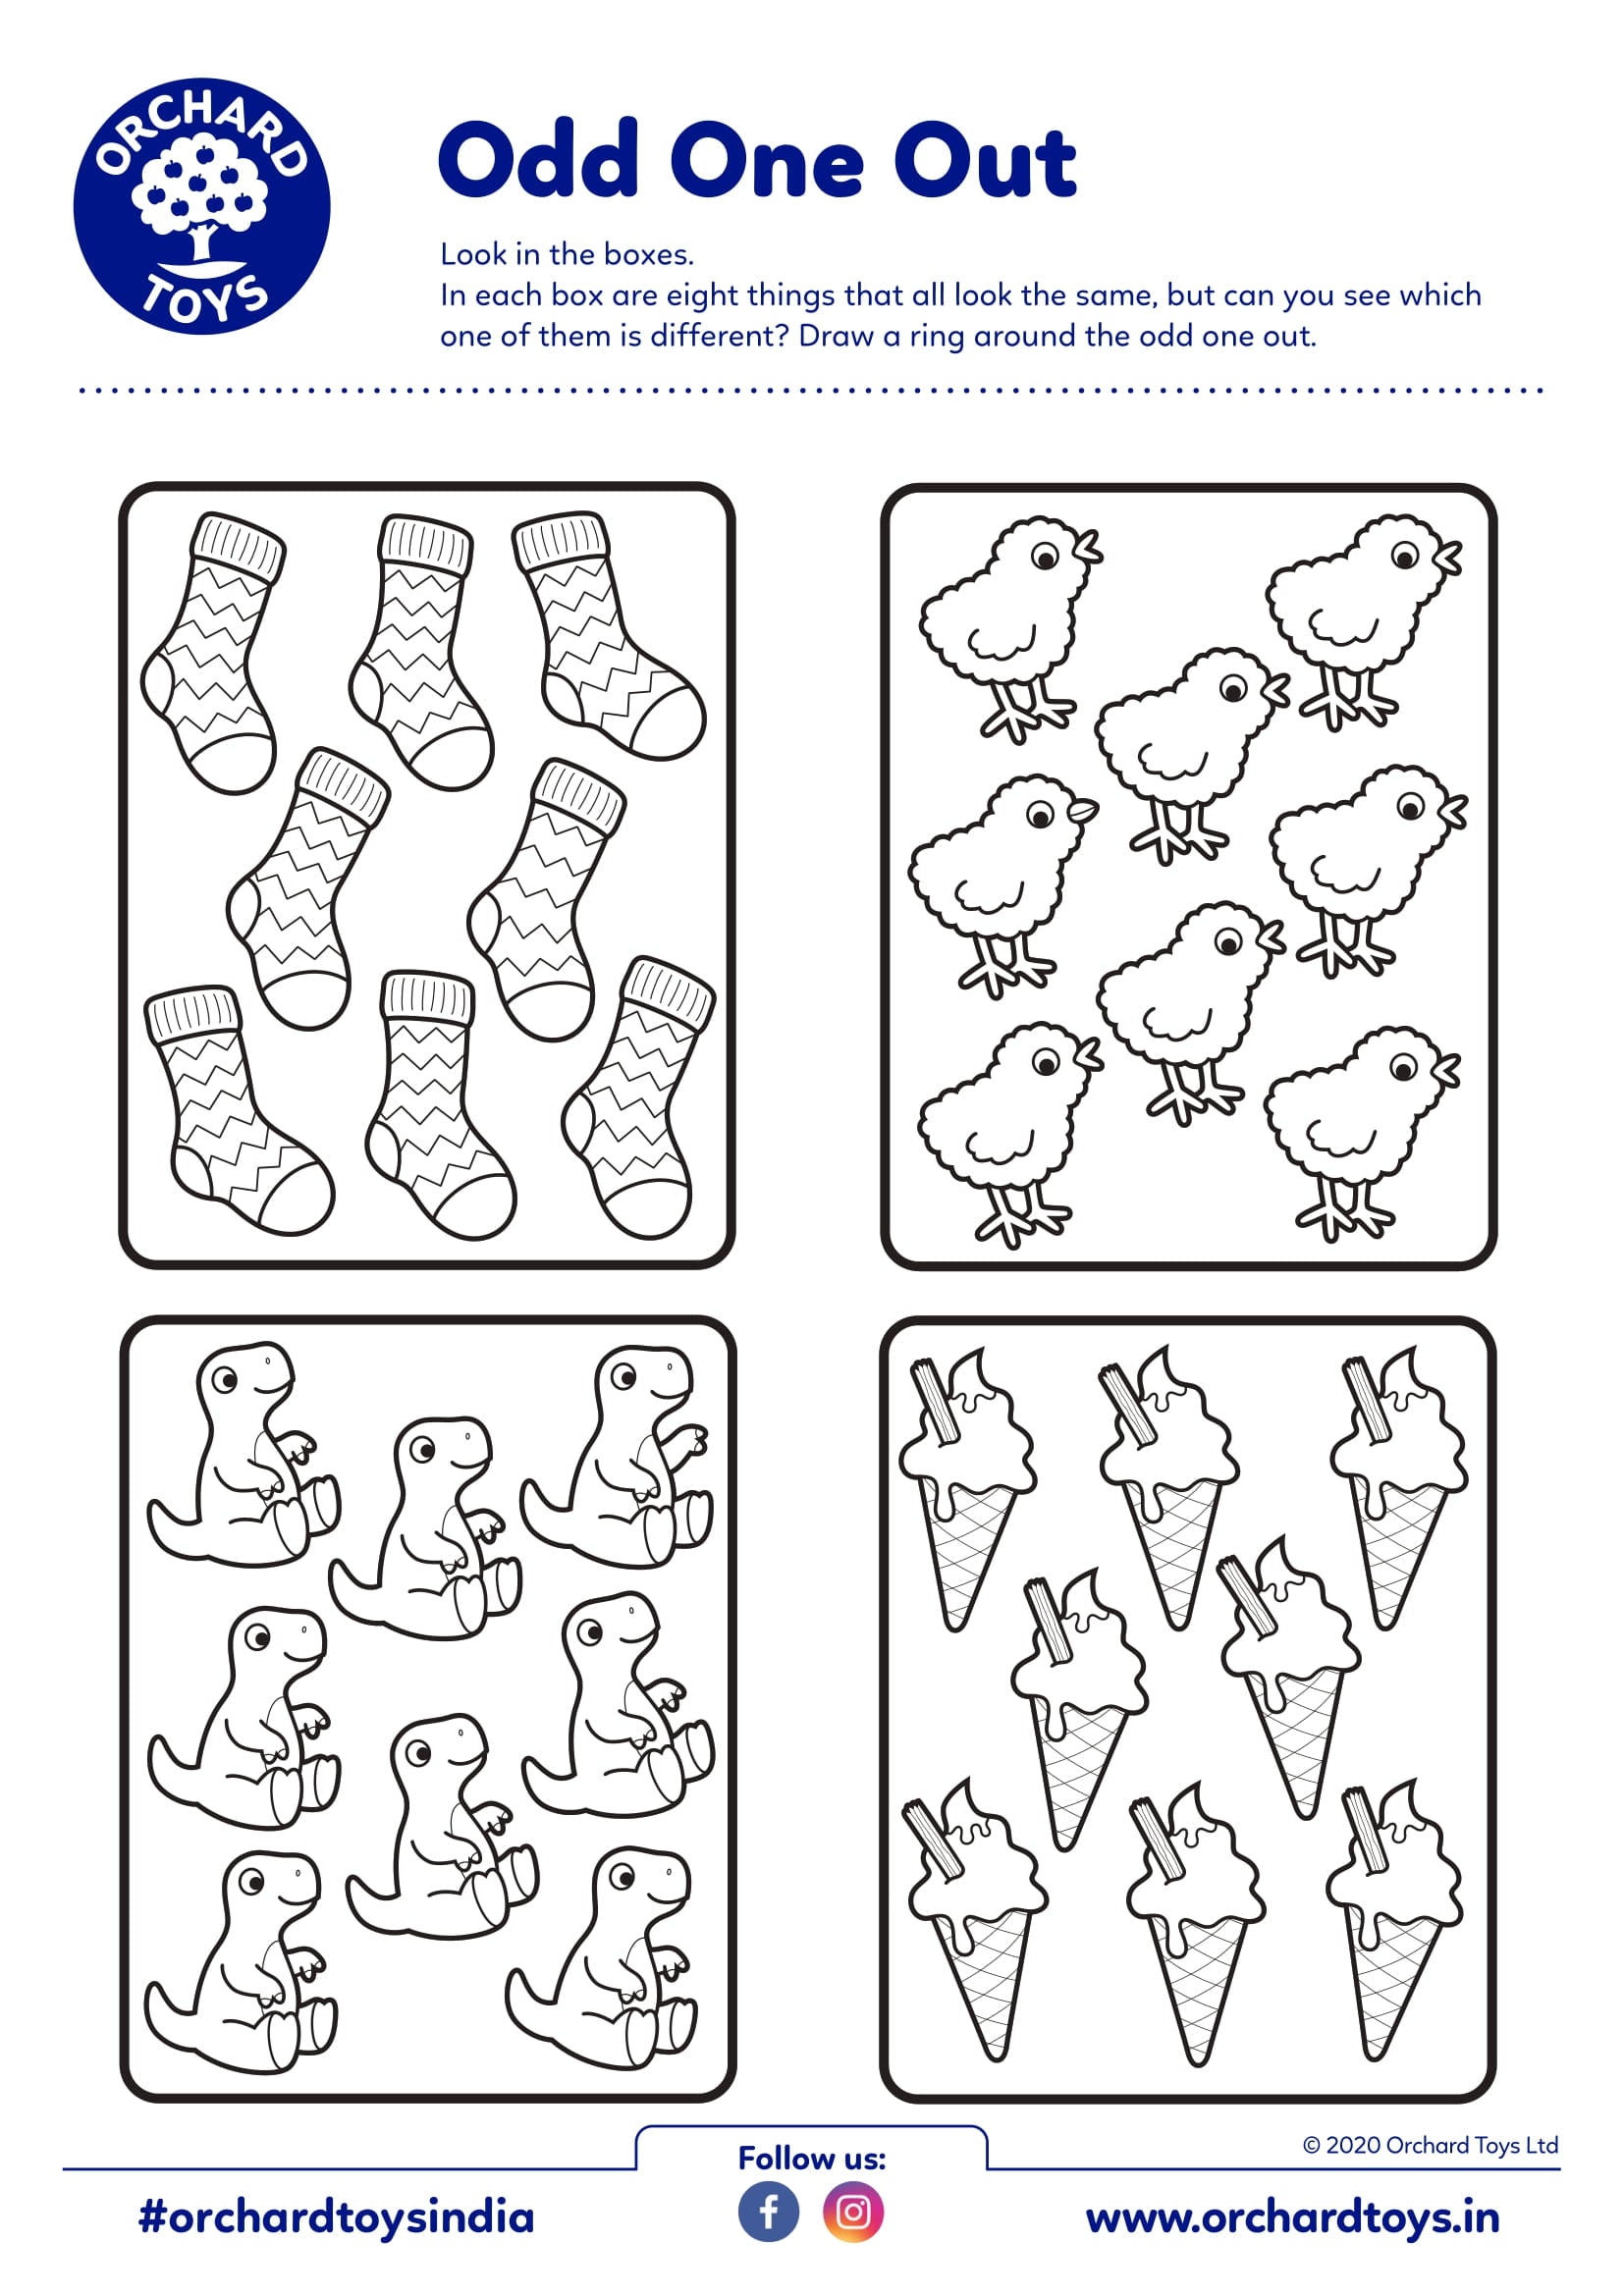 Odd One Out Activity Sheet